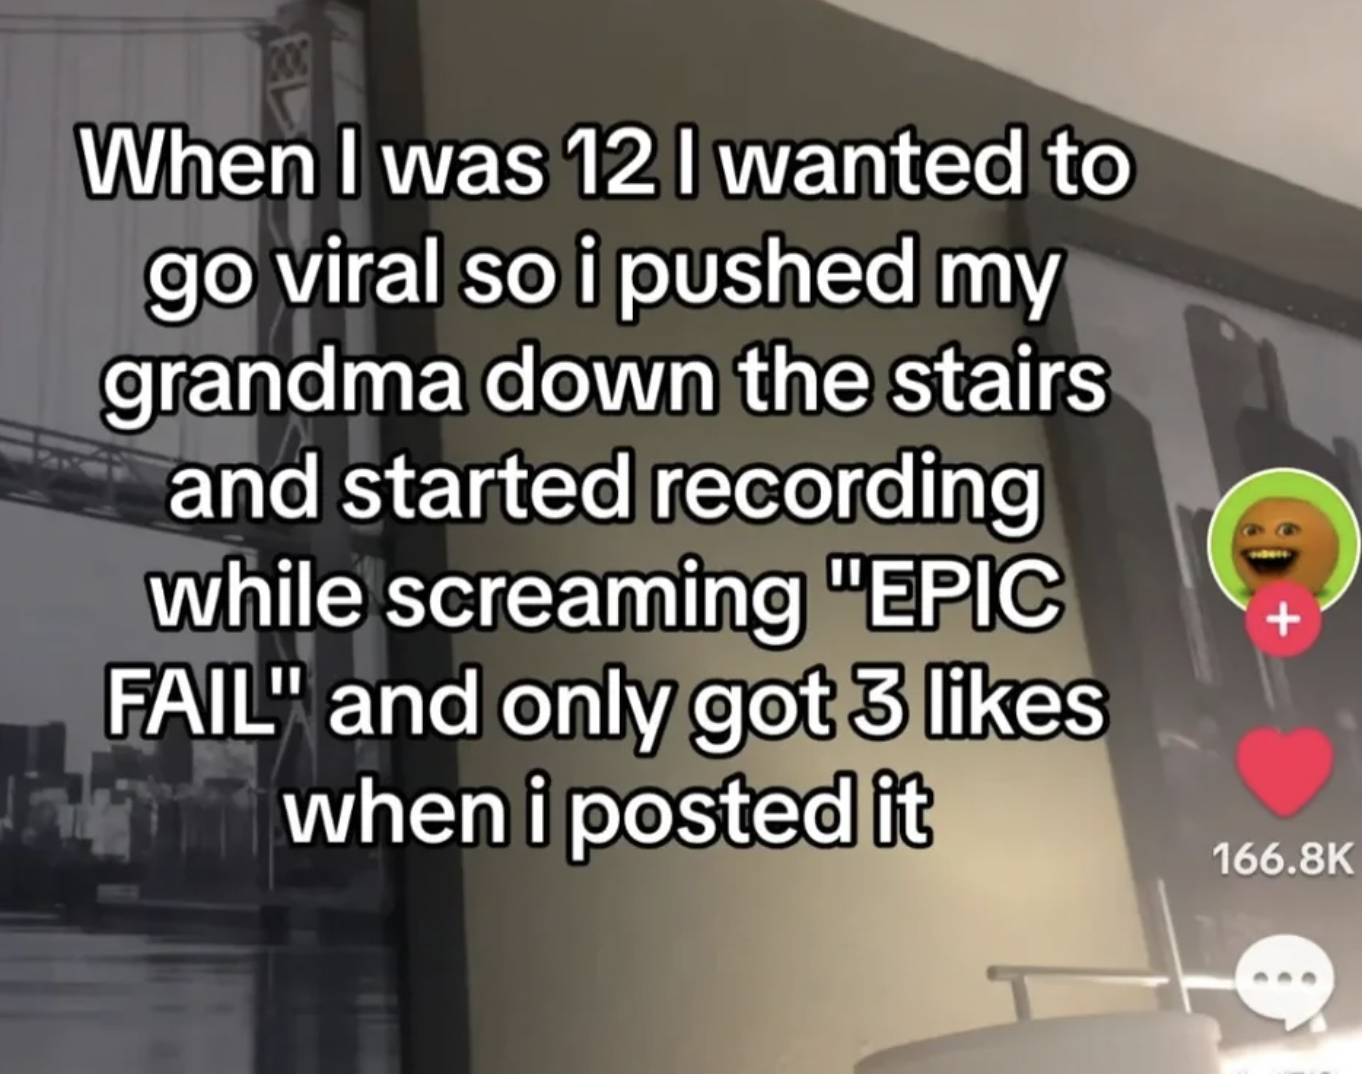 screenshot - When I was 12 I wanted to go viral so i pushed my grandma down the stairs and started recording while screaming "Epic Fail" and only got 3 when i posted it